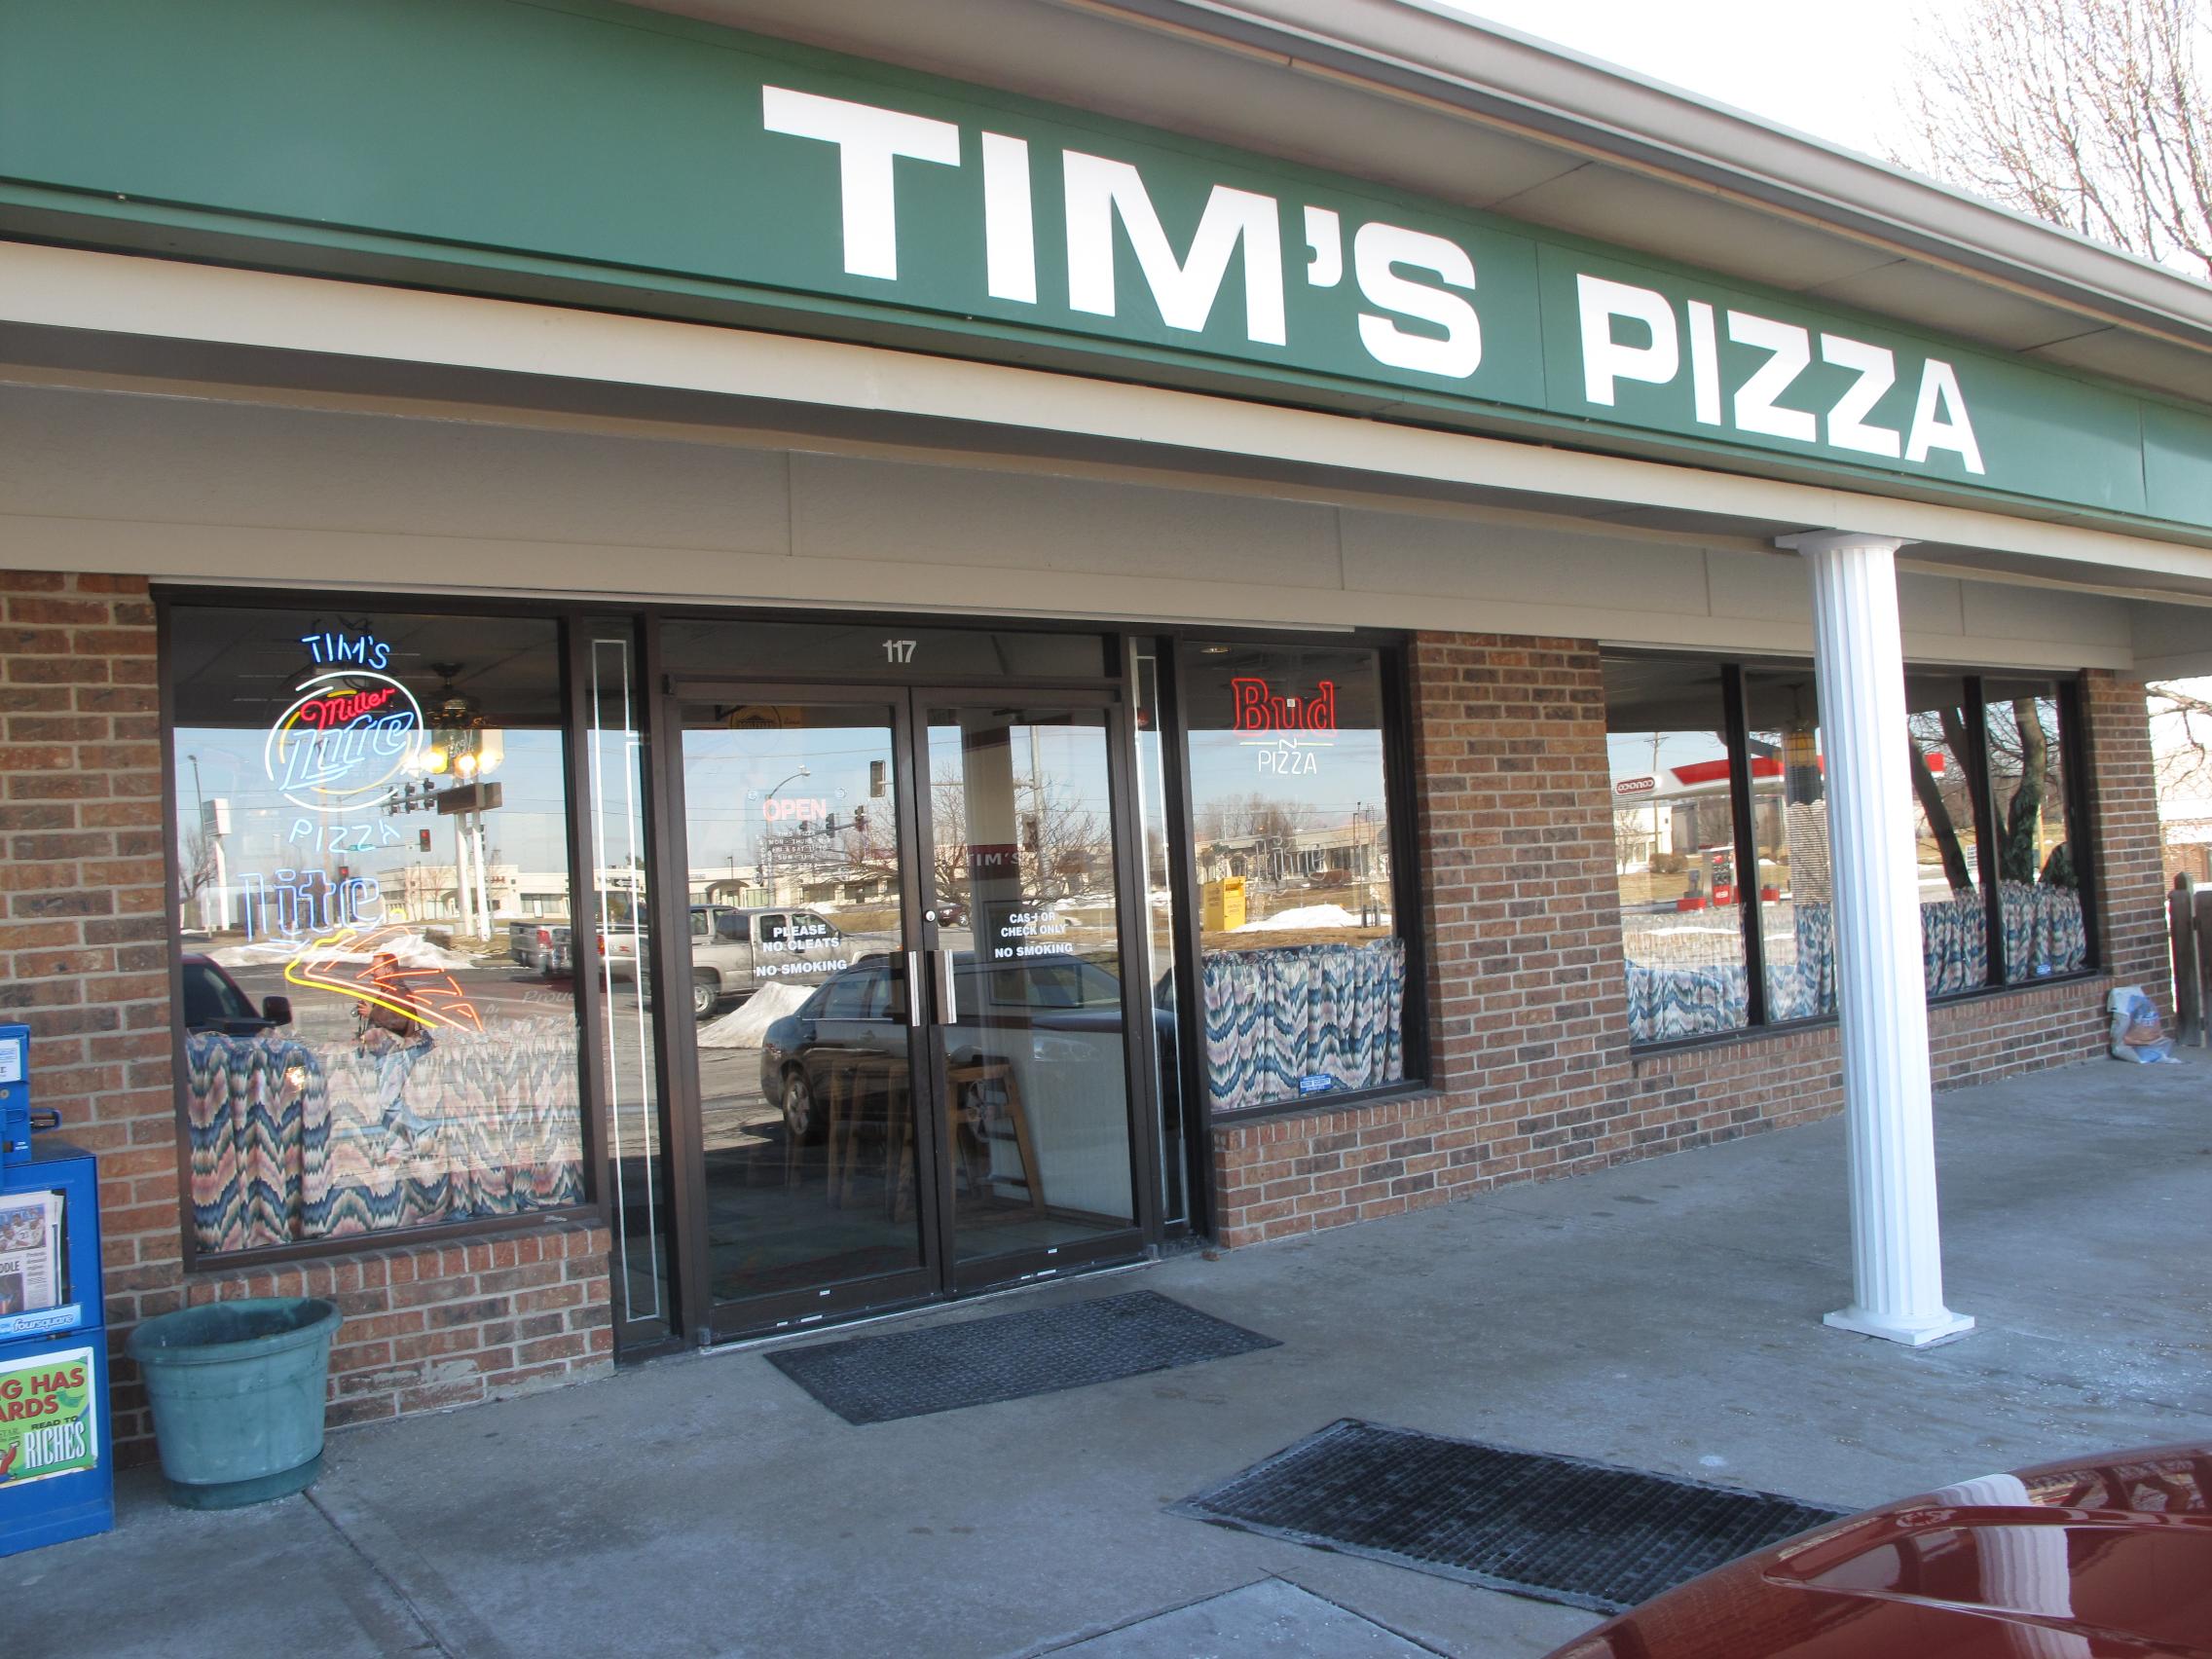 Tims pizza